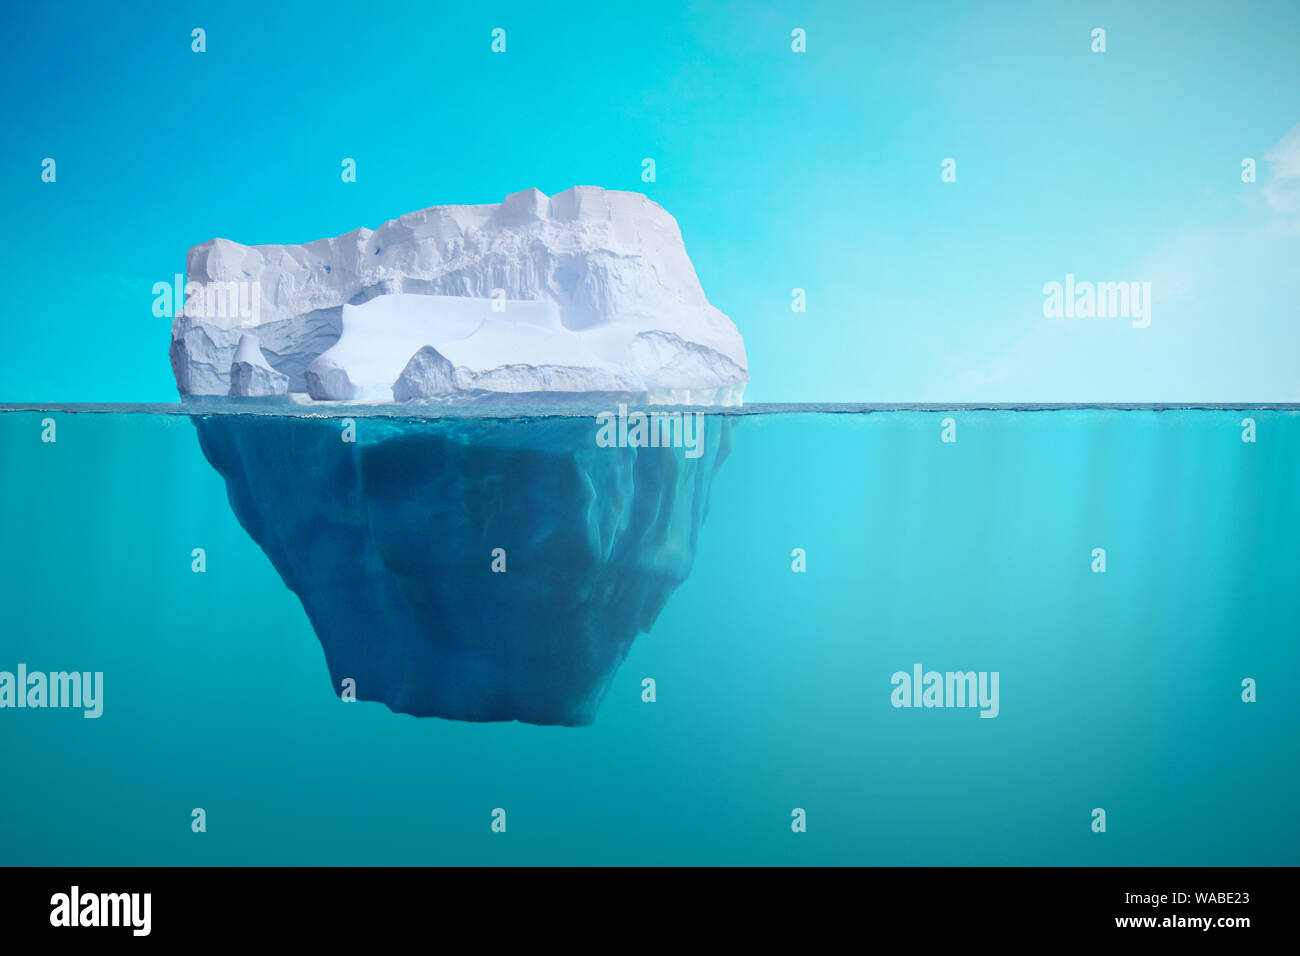 Iceberg under water view. Climate warming, environment and oceanic ecoxsytem concept. Stock Photo